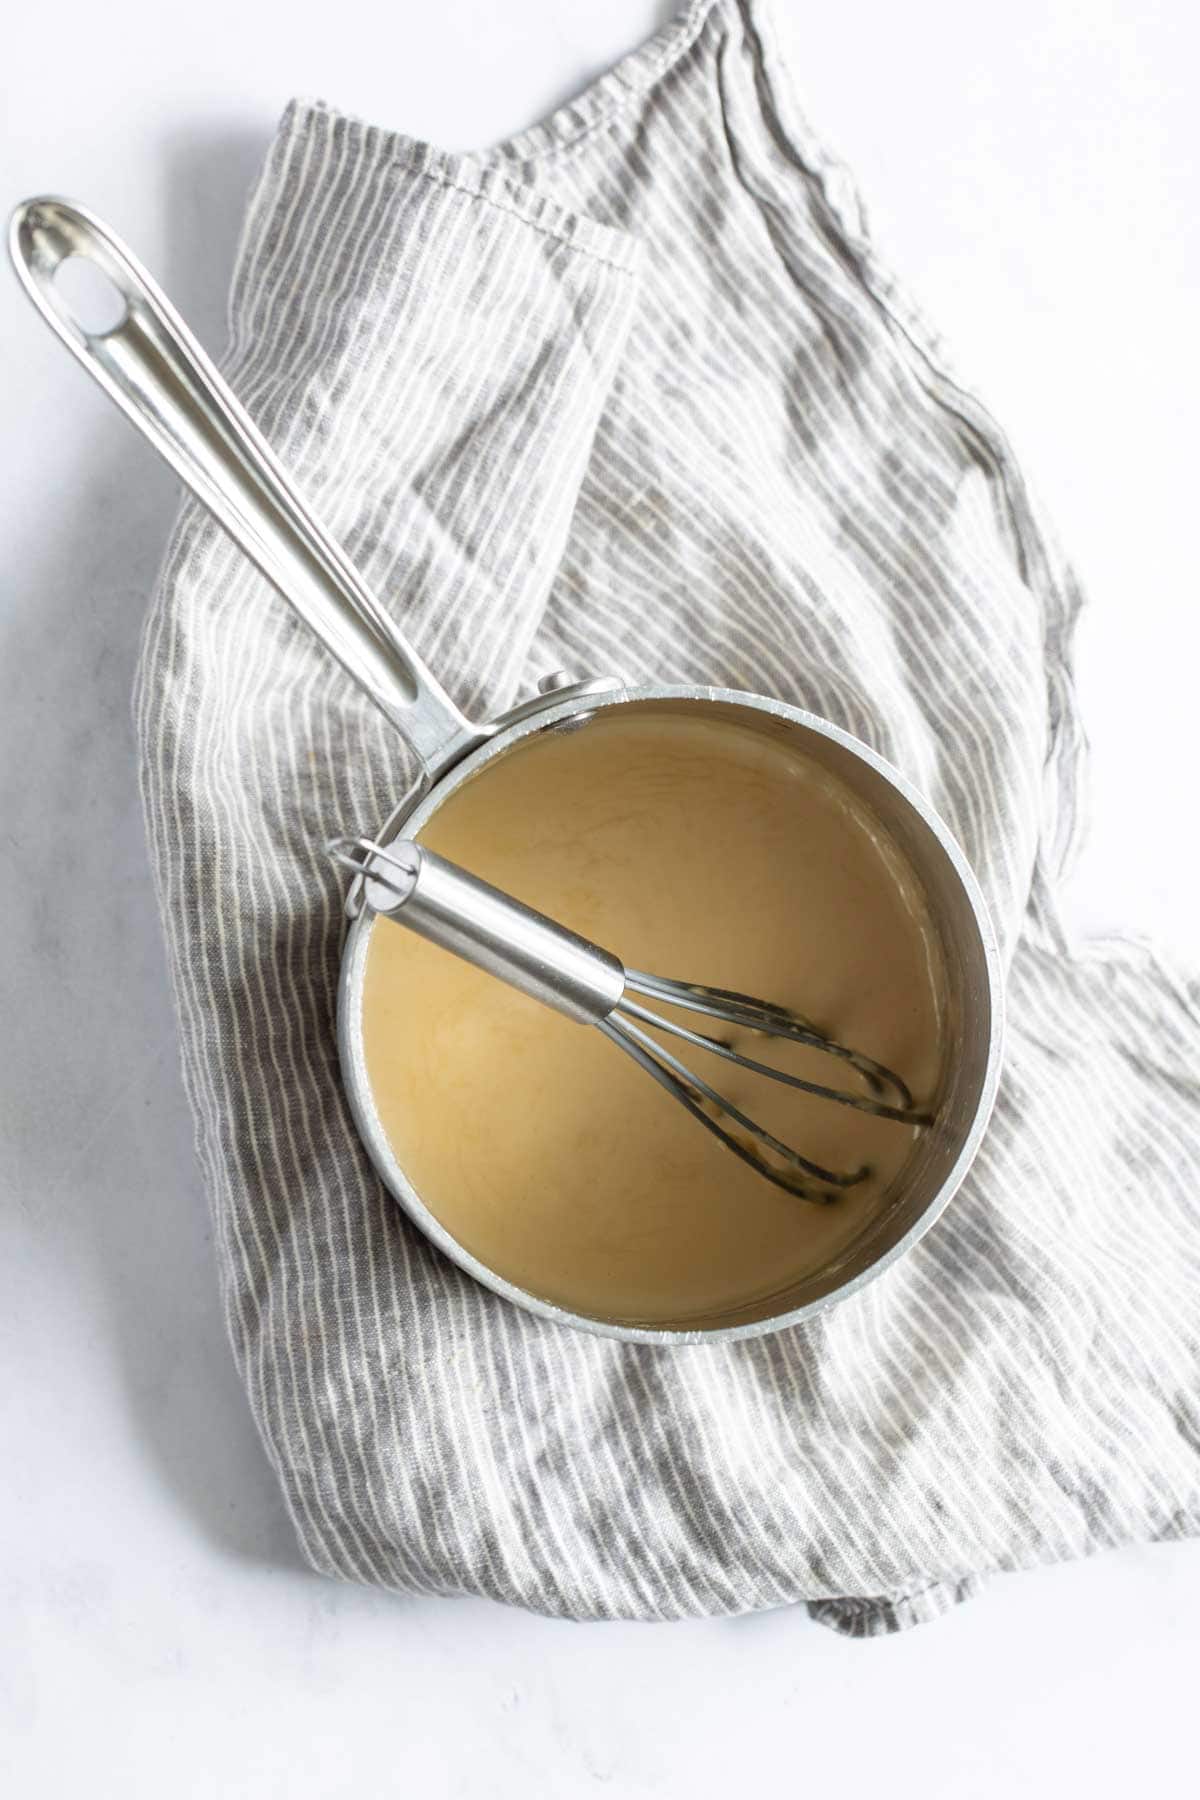 Overhead view of a saucepan containing beige sauce with a whisk, resting on a striped cloth on a marble surface.